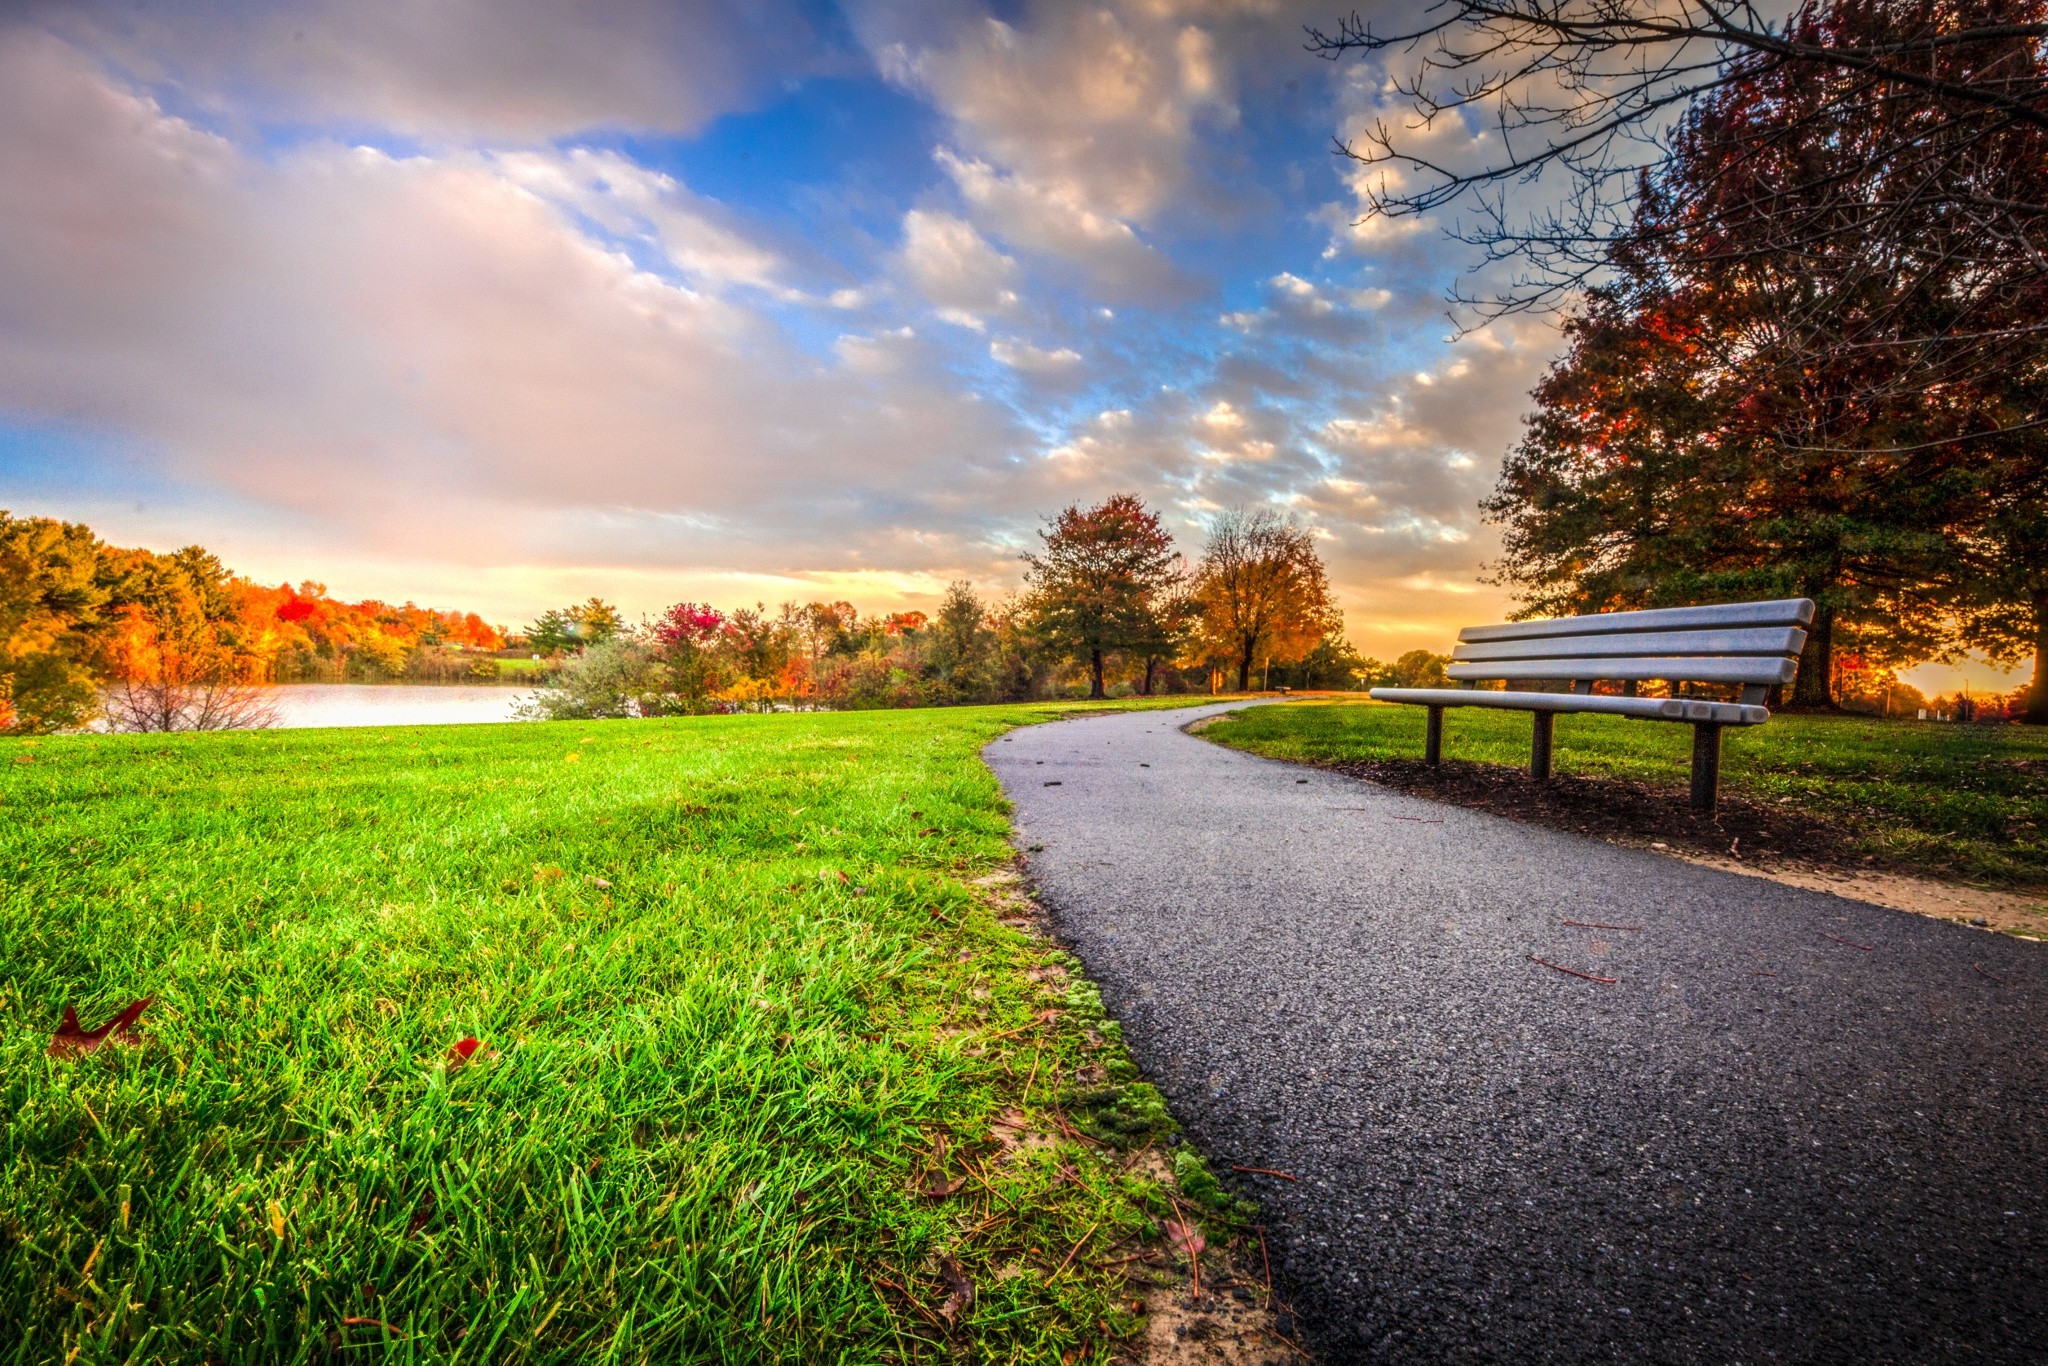 sunset, Bench, Park, Trees, Clouds, Grass, Fall, Nature, Landscape, Green, HDR, Path Wallpaper